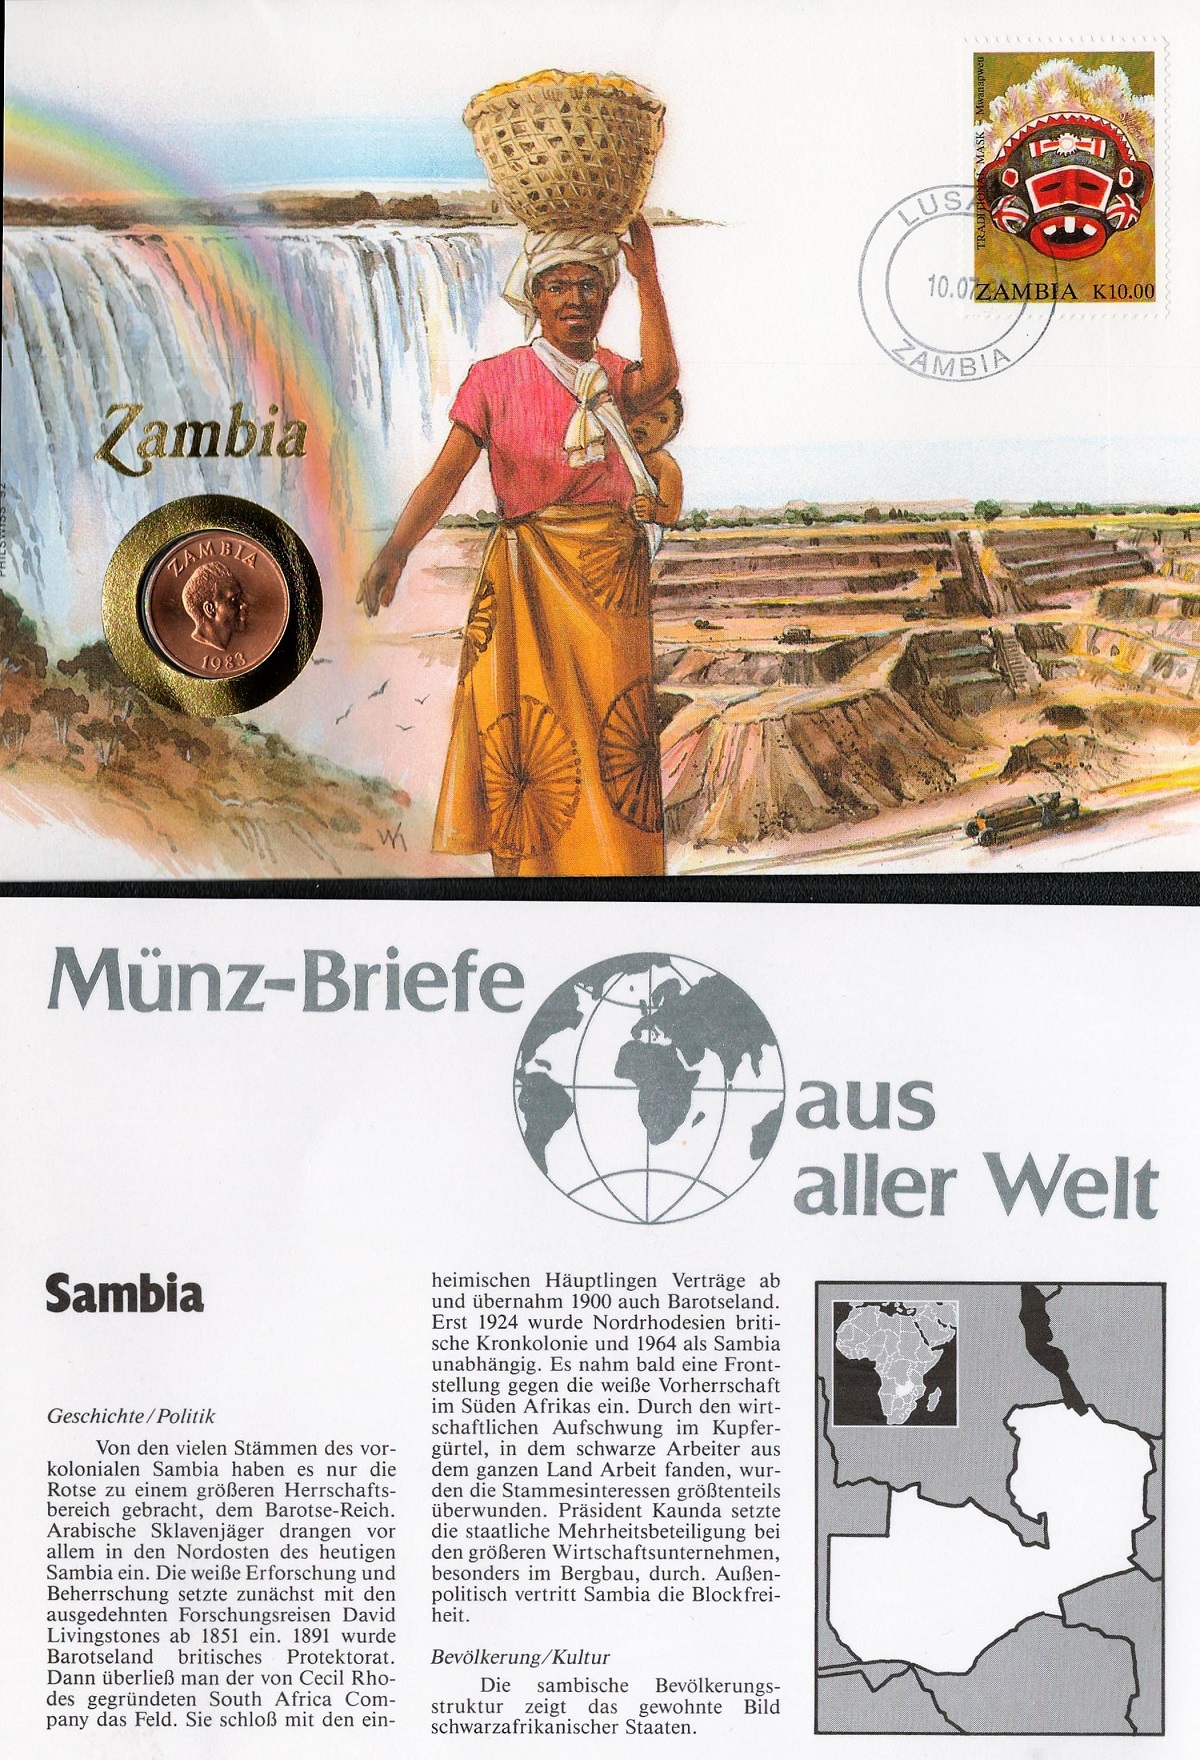 Zambia Two Ngwee Coin First Day Cover with 10. 07 Zambia Stamp. Included is a German Language Info